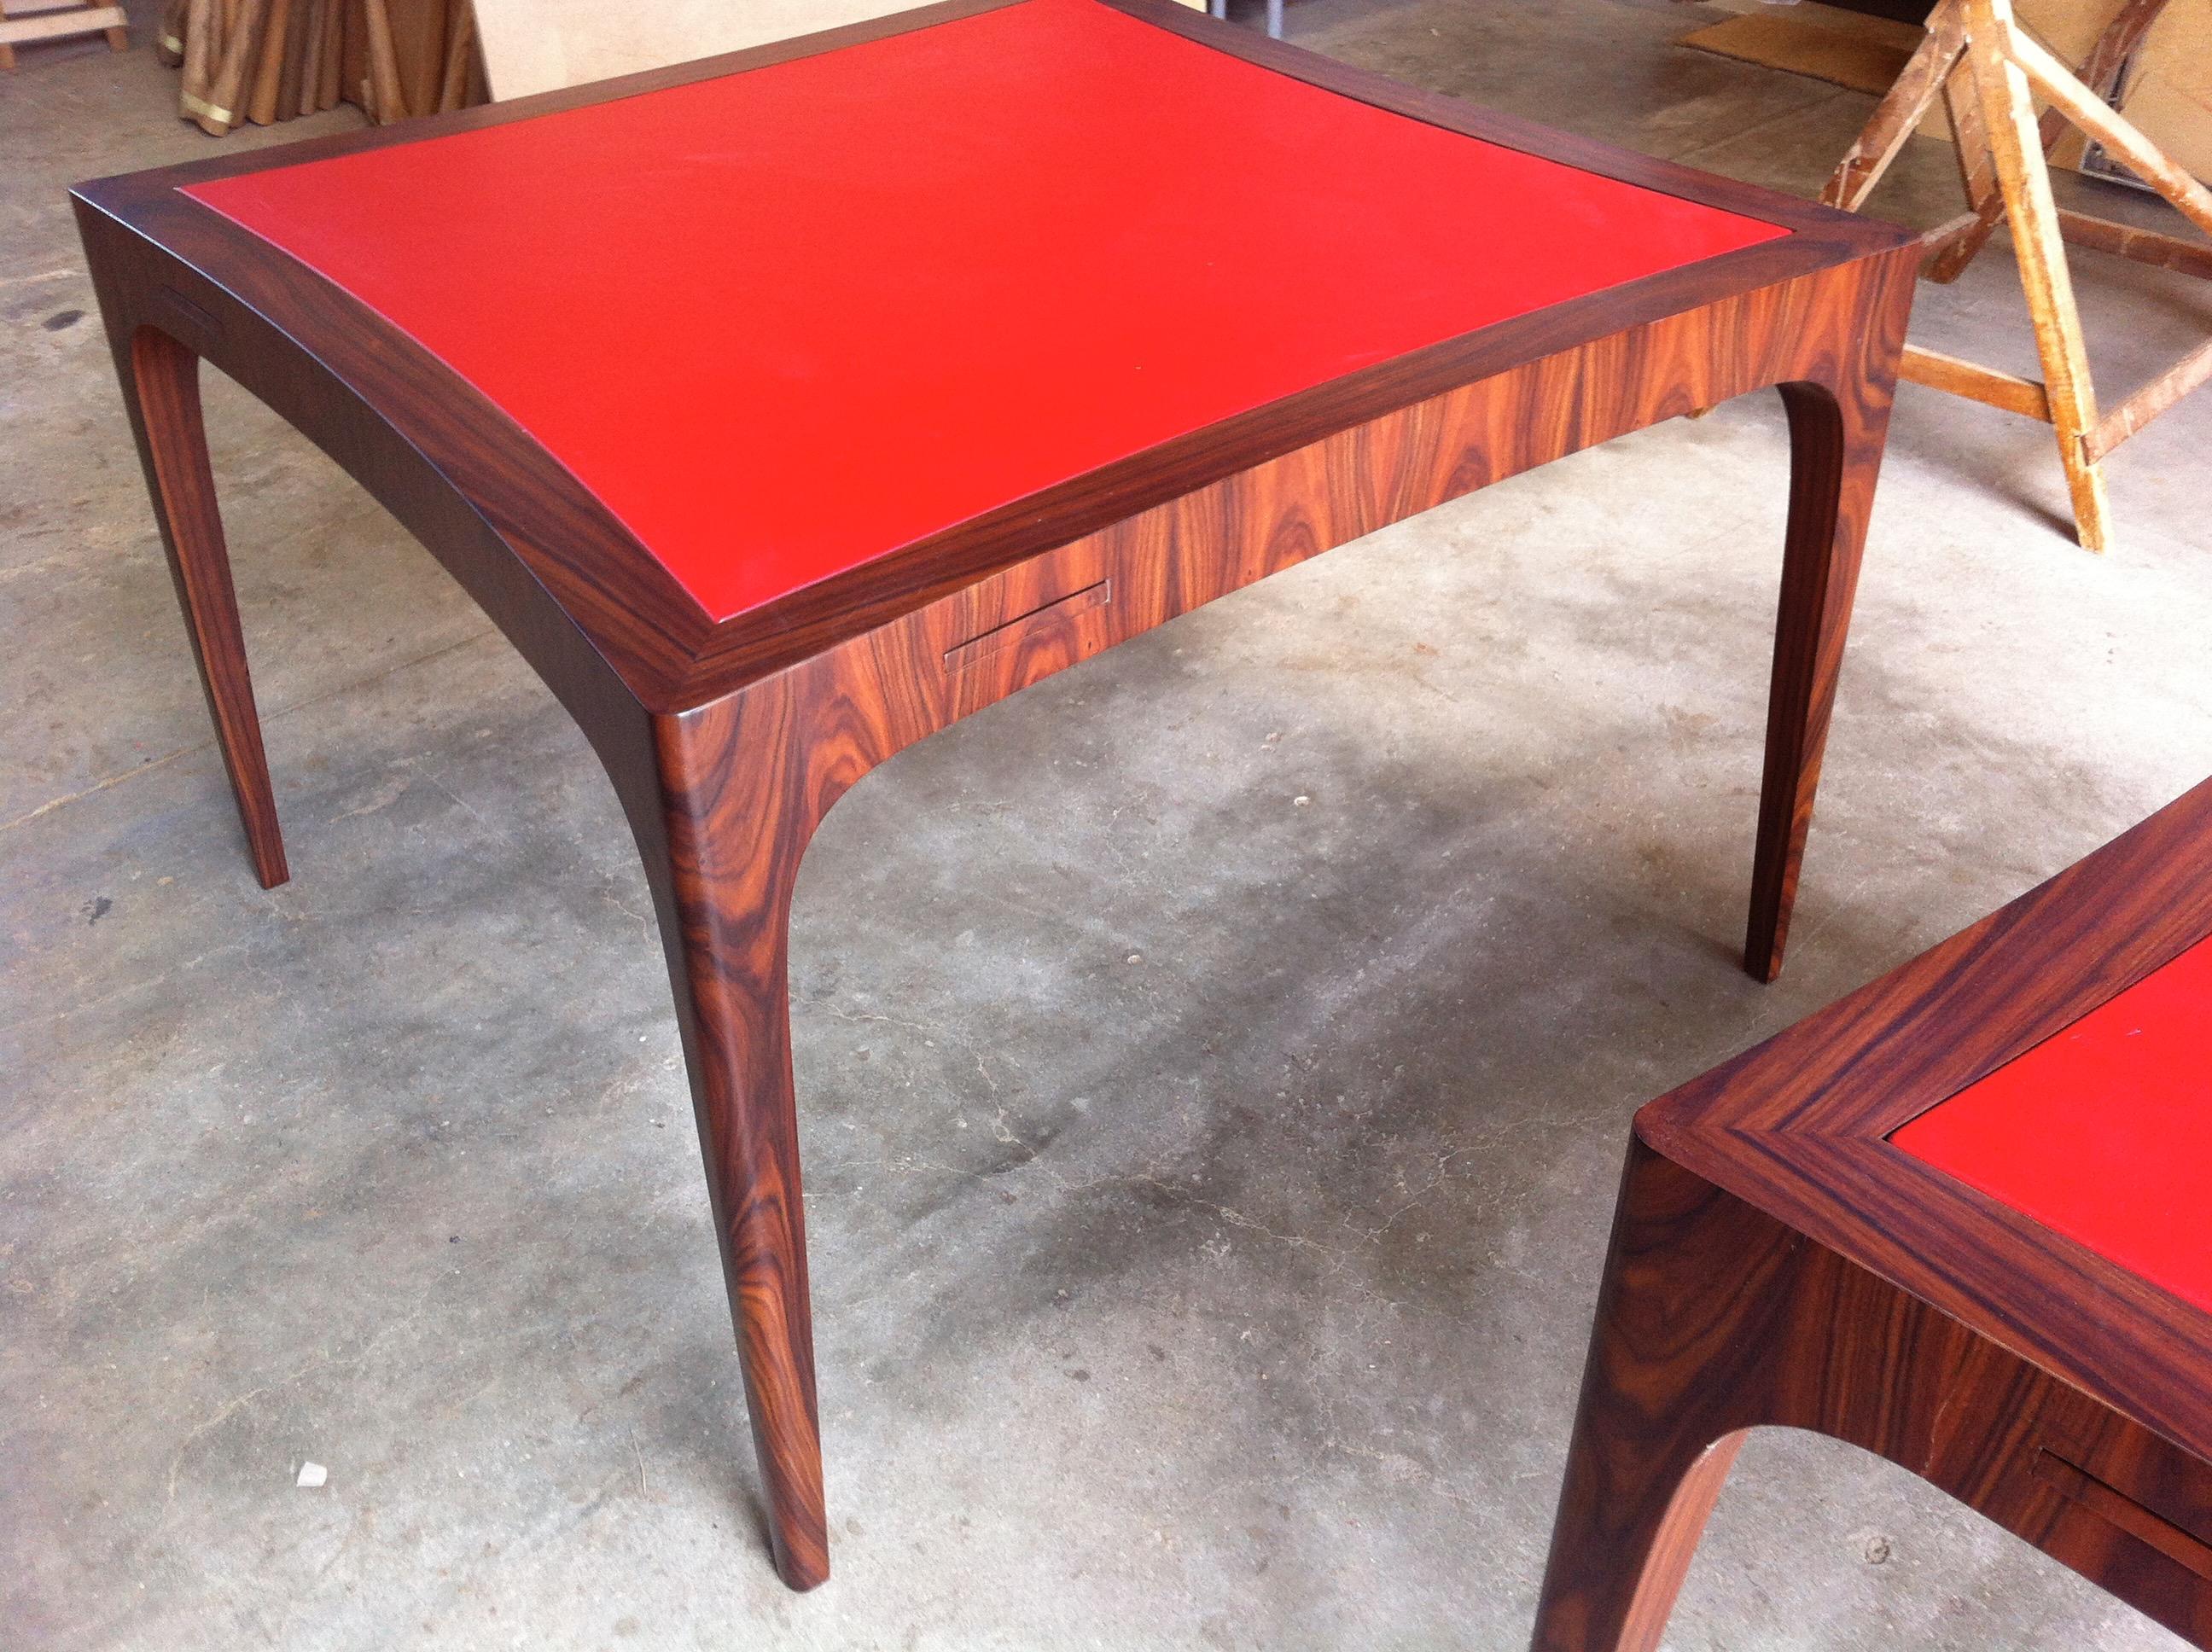 Game table with lined cover and support for glasses.
Possibility to mix woods and lacquers.

Bespoke / Customizable
Identical shapes with different sizes and finishings.
All RAL colors available. (Mate / Half Gloss / Gloss)